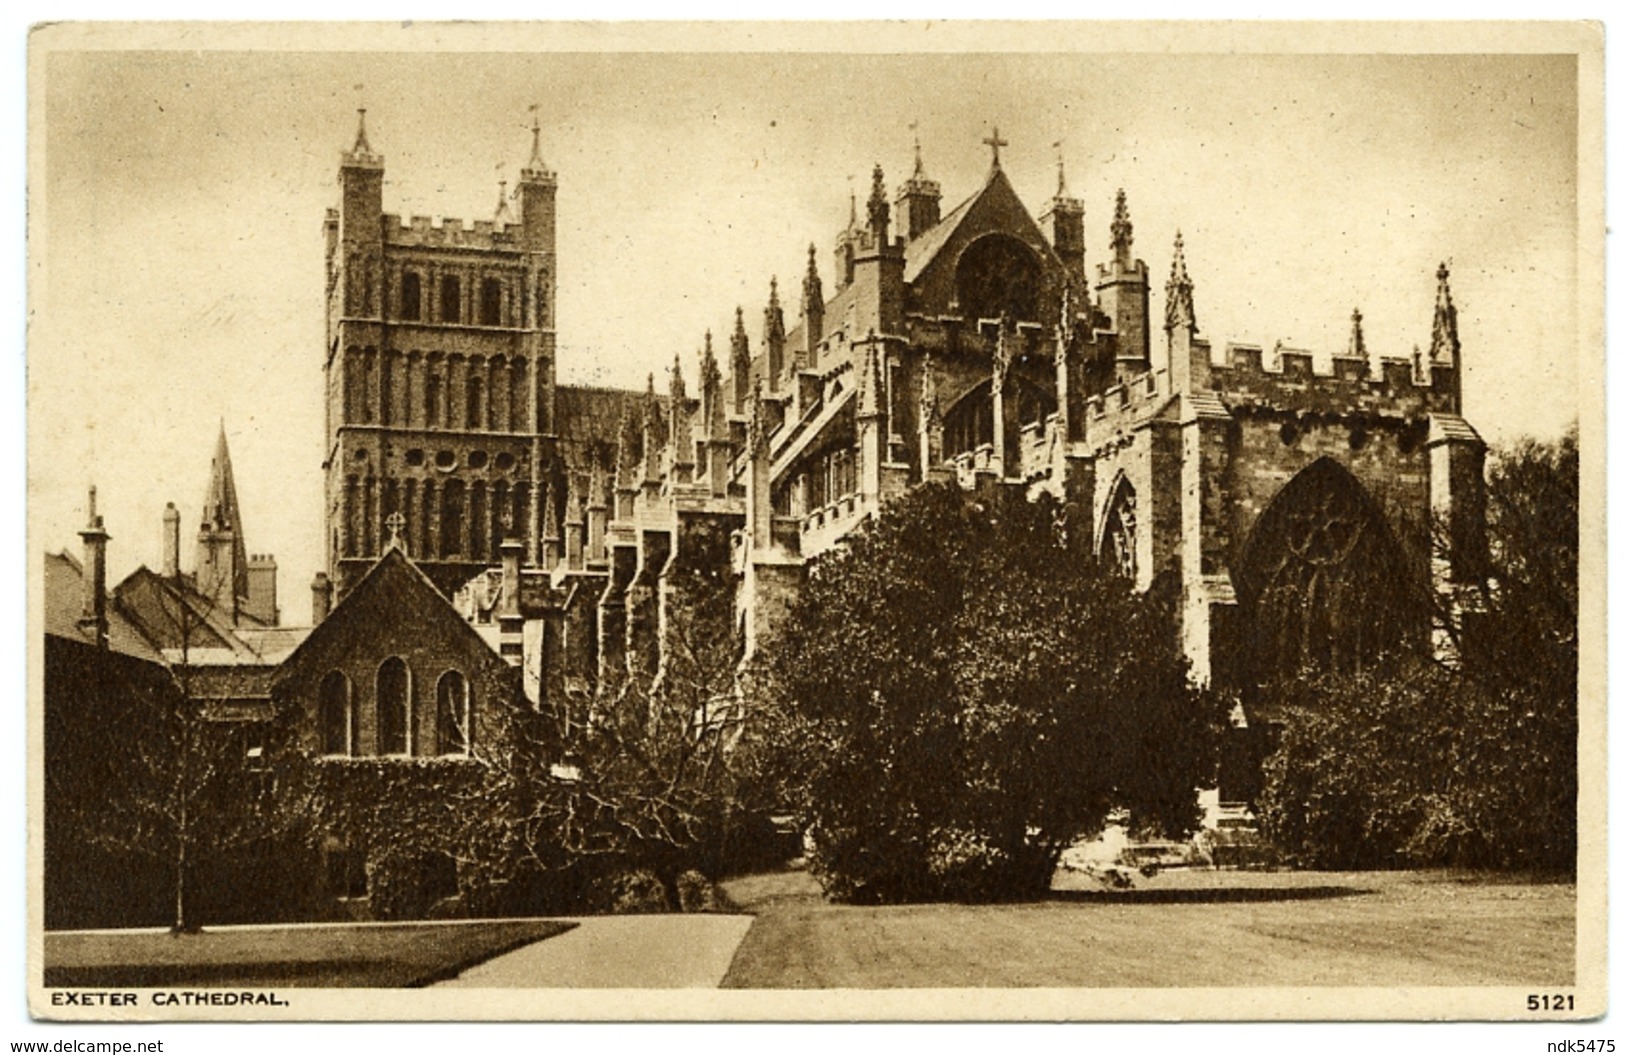 EXETER CATHEDRAL / CORONATION 1953 / ADDRESS - MAIDENHEAD, ISLET PARK CLUB / SIDMOUTH, WESTCLIFF HALL HOTEL - Royal Families